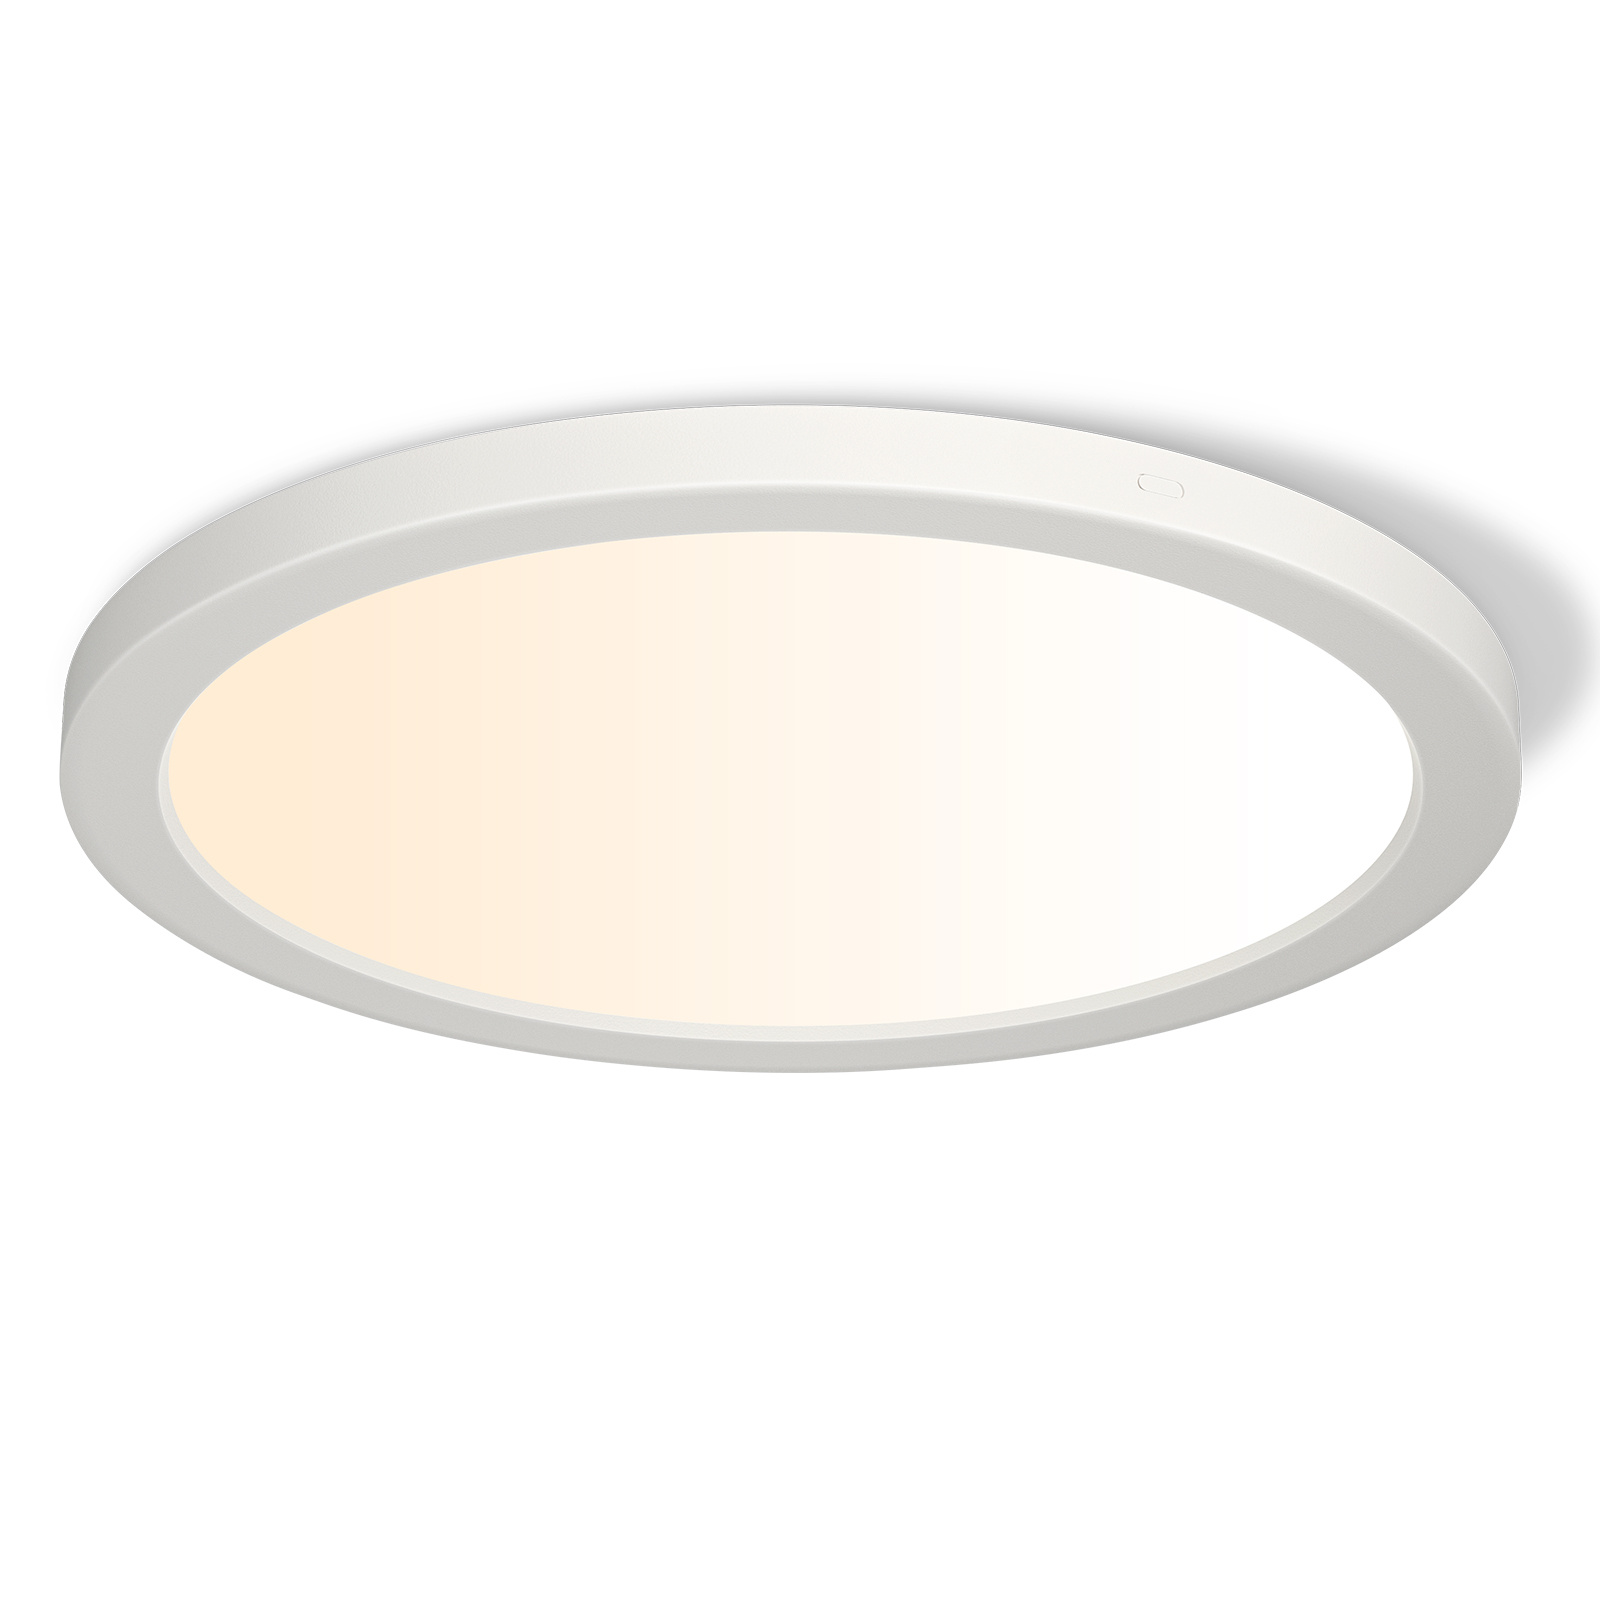 24W LED Flush Mount Ceiling Light, CHEEROLL 12 inch LED Ceiling Light Fixture, Adjustable 3 Colors 3000K/4000K/5000K, Ultra Silm 0.63 inch Dimmable Light Fixture for Bedroom, Kitchen, ETL Listed